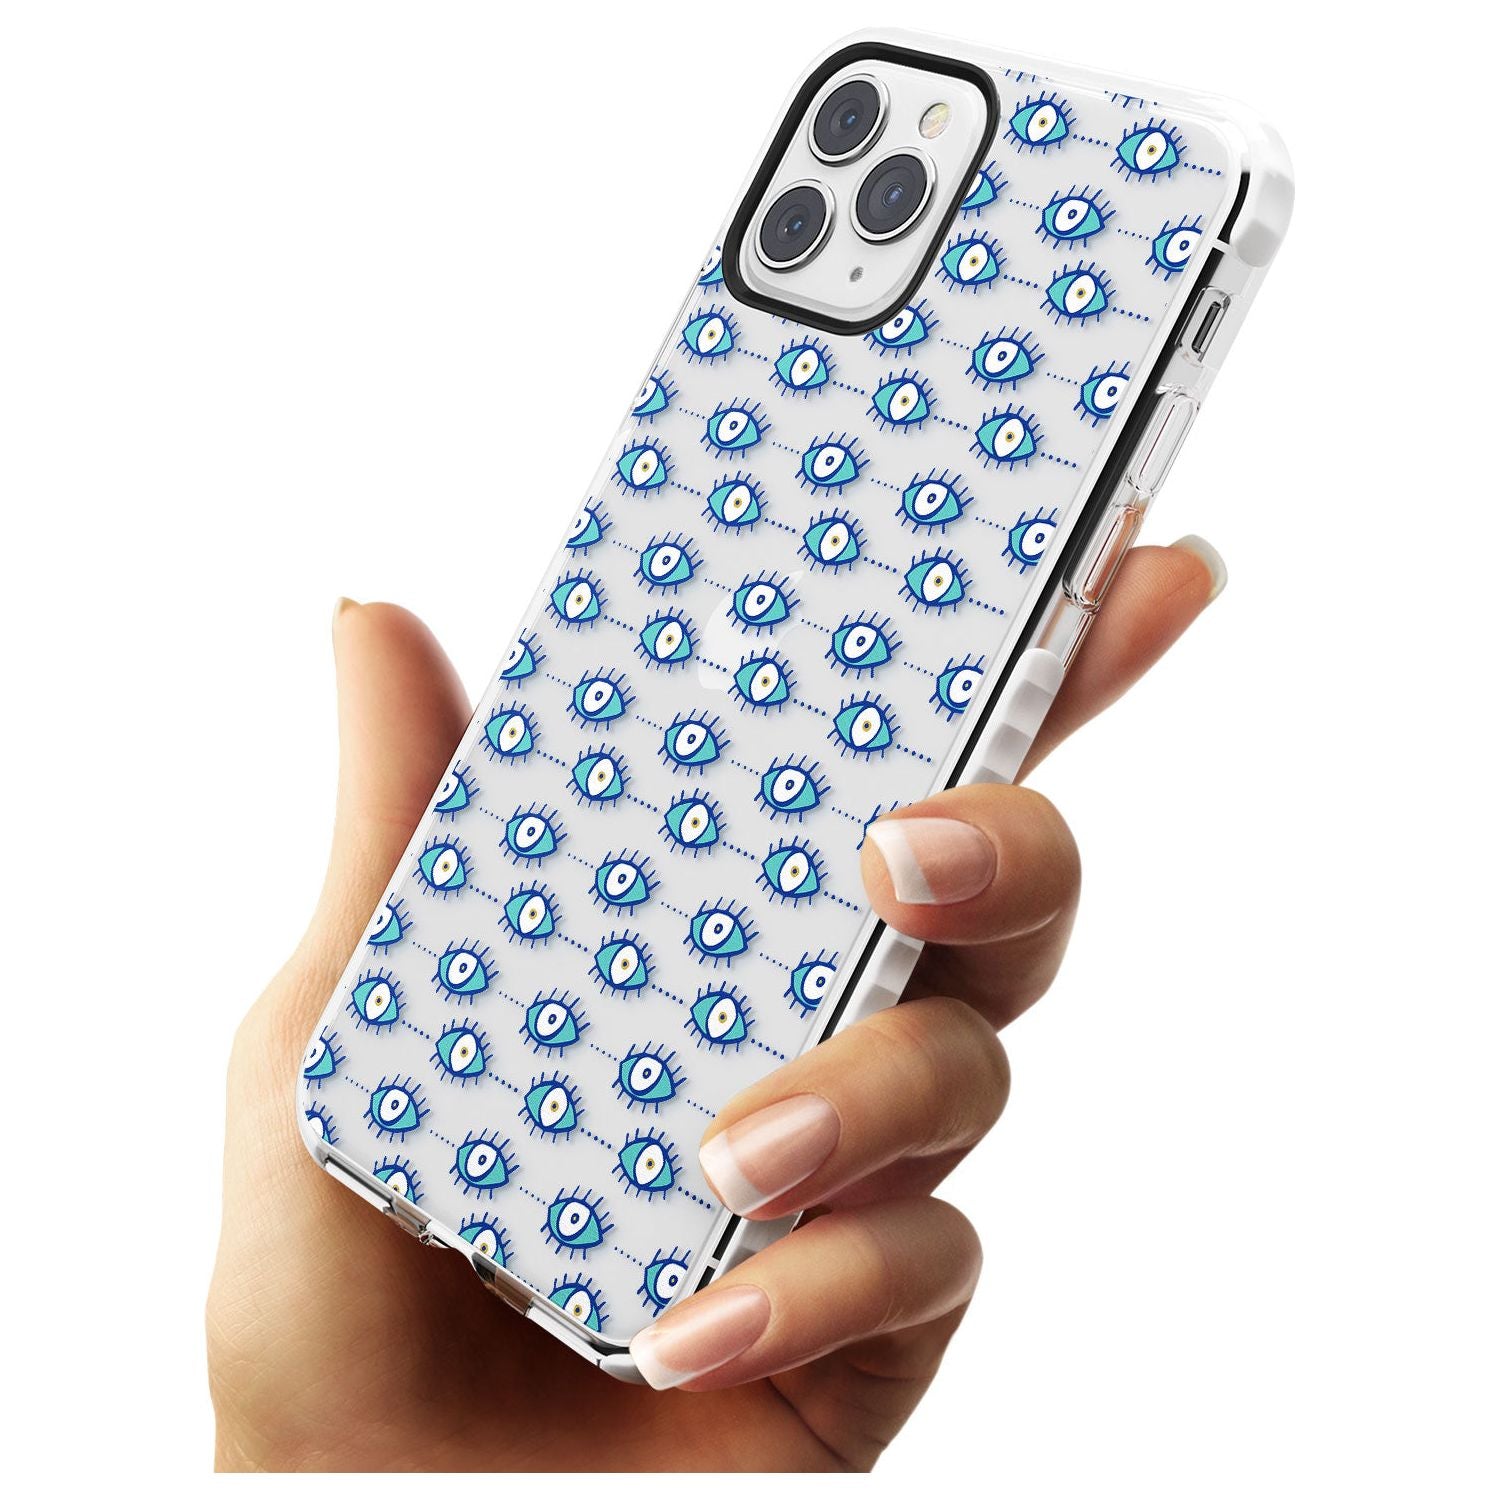 Crazy Eyes (Clear) Psychedelic Eyes Pattern Impact Phone Case for iPhone 11 Pro Max